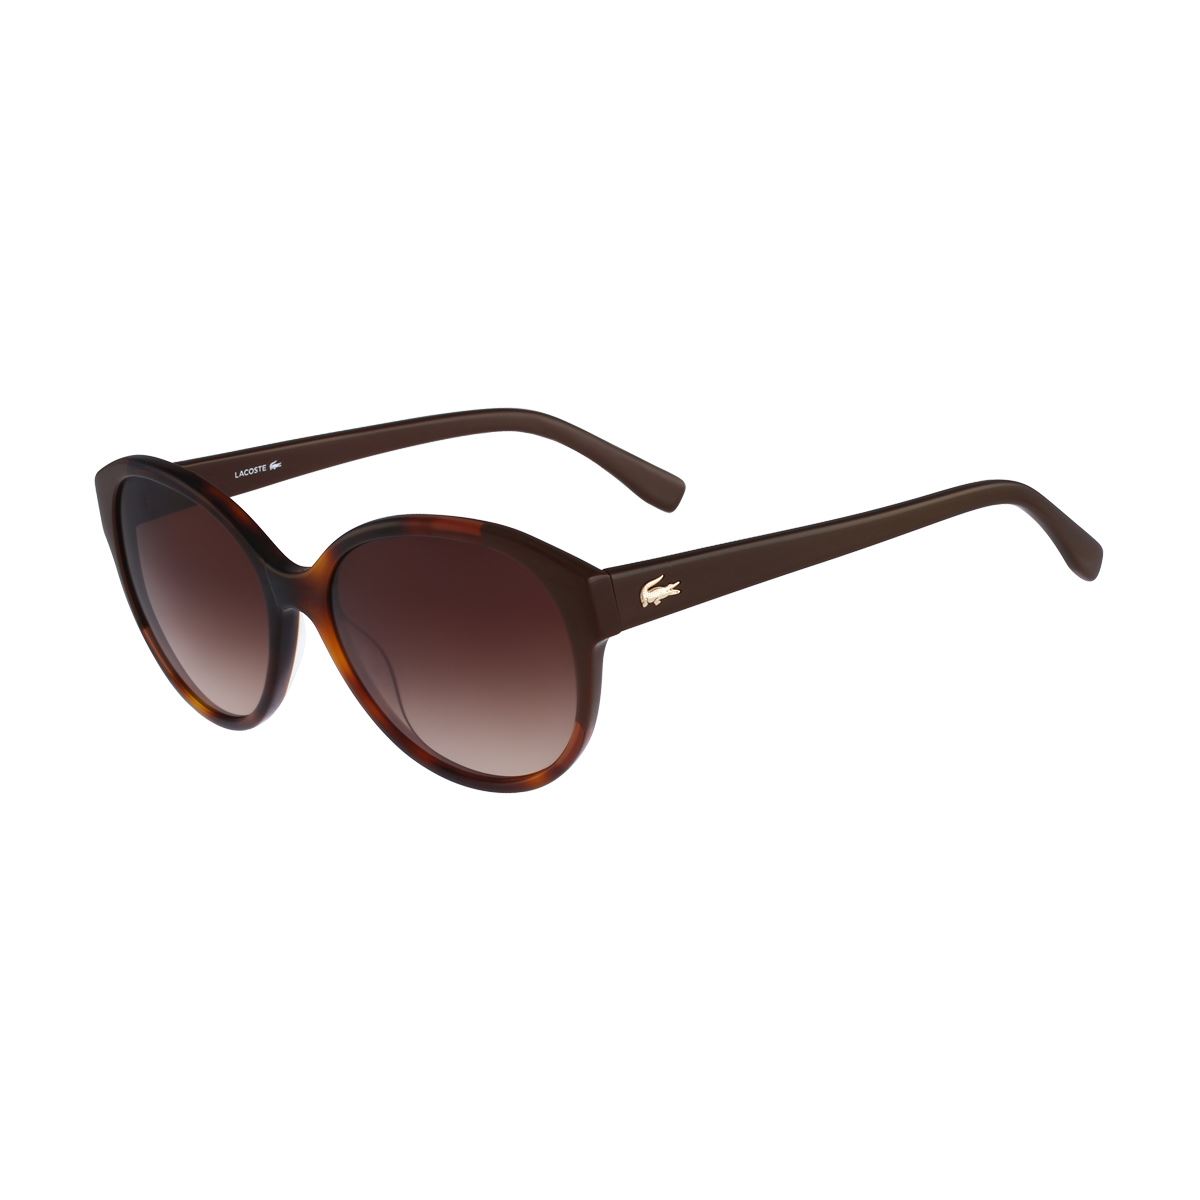 Solar Lacoste 774s 56 214 f Cafe